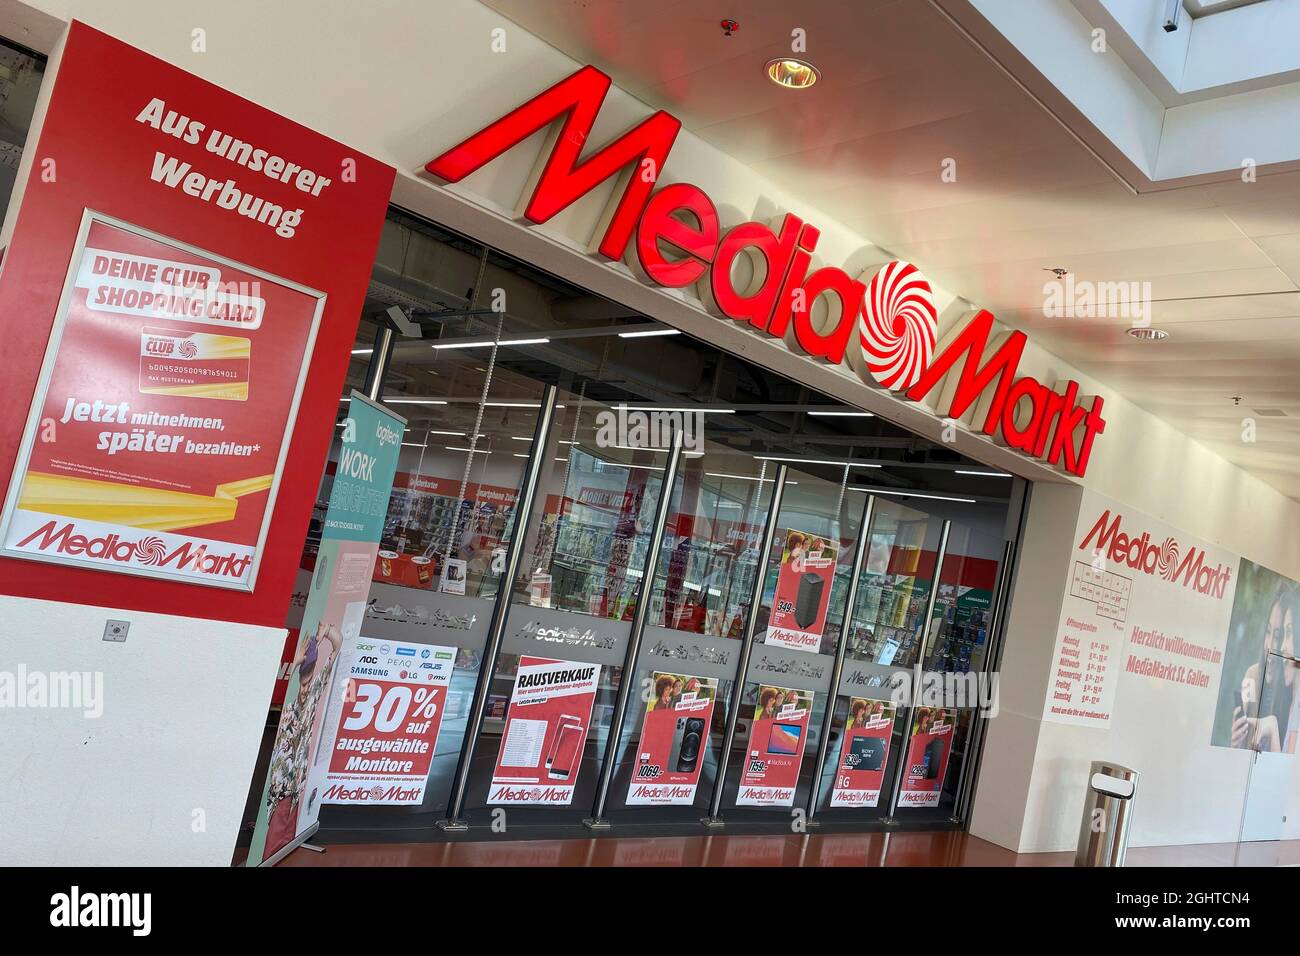 Media-Saturn is the operator of a German electronics retail chain